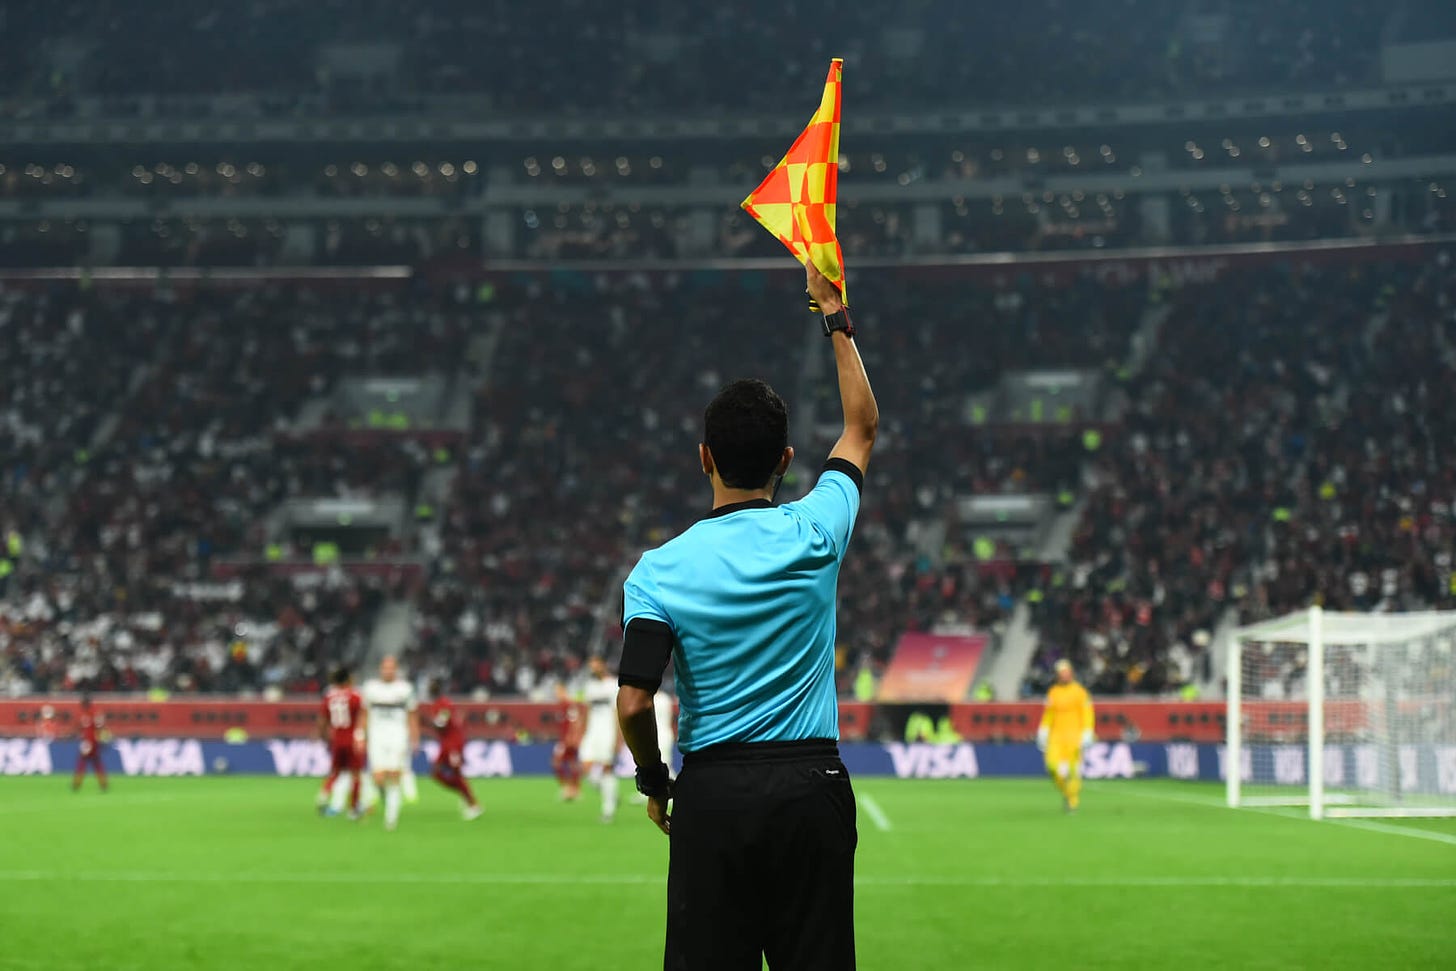 Law 11 - Offside: 'deliberate play' guidelines clarified | IFAB